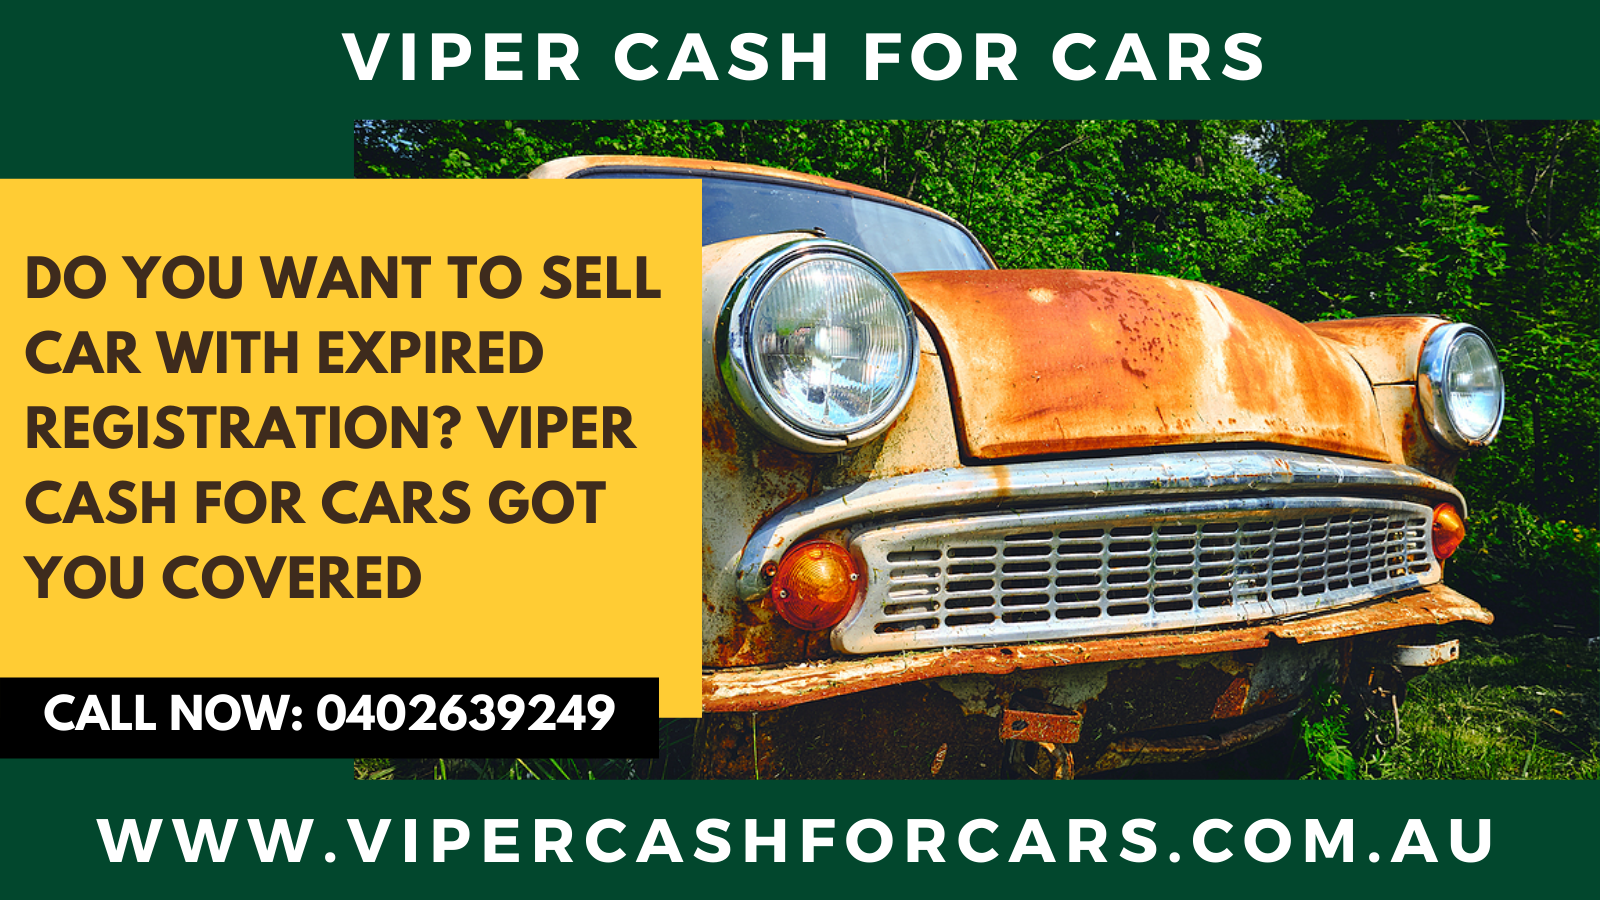 Do You Want To Sell Car With Expired Registration? Viper Cash For Cars Got You Covered